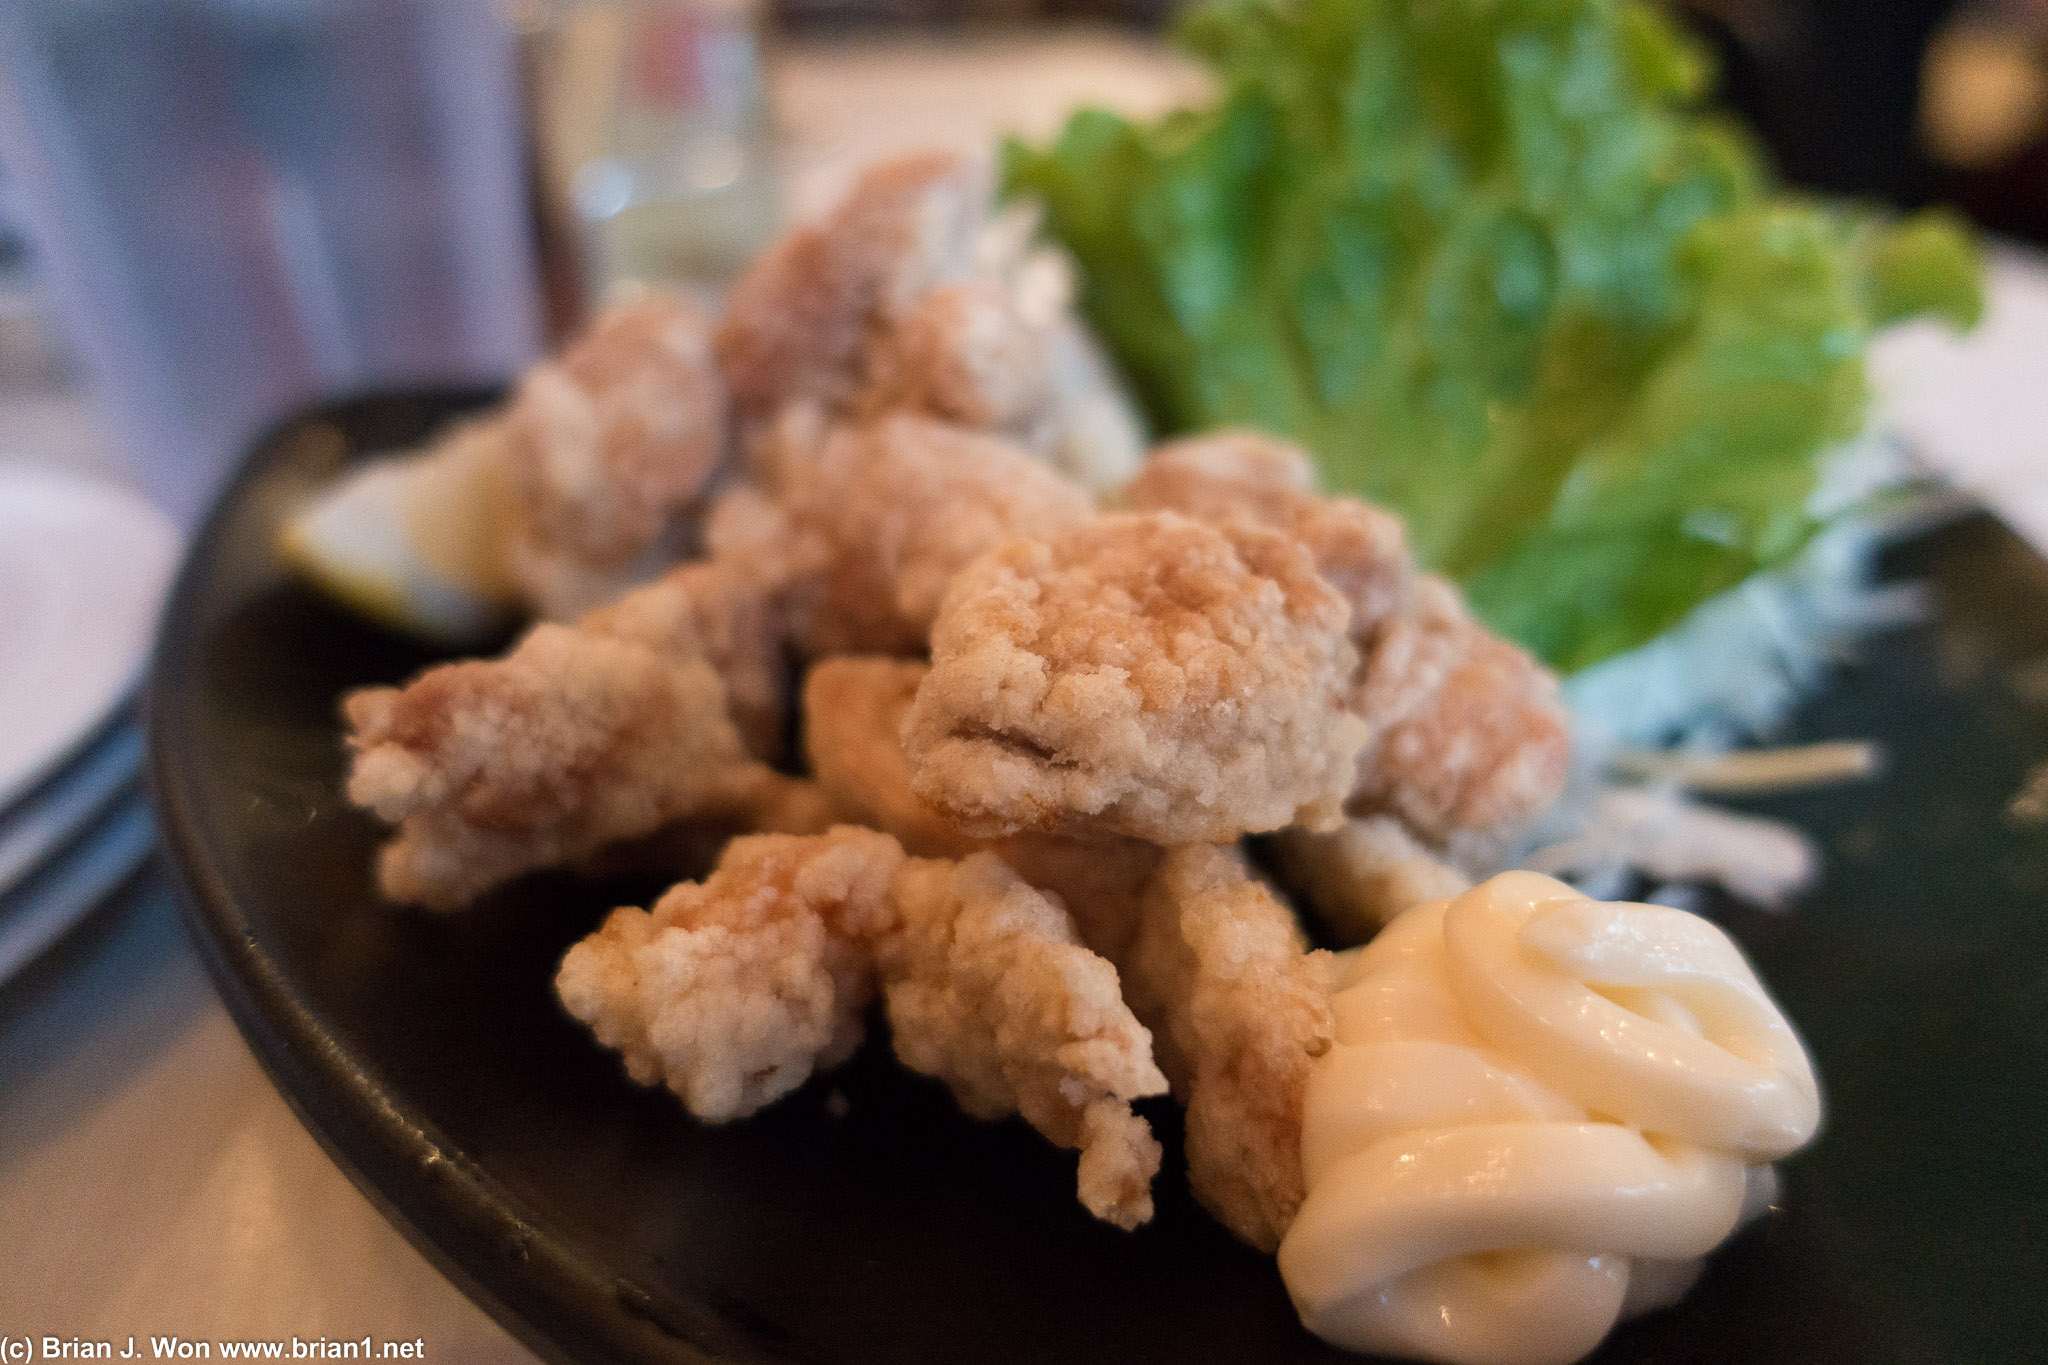 Fried chicken isn't just for for the adults. It's for kids too!